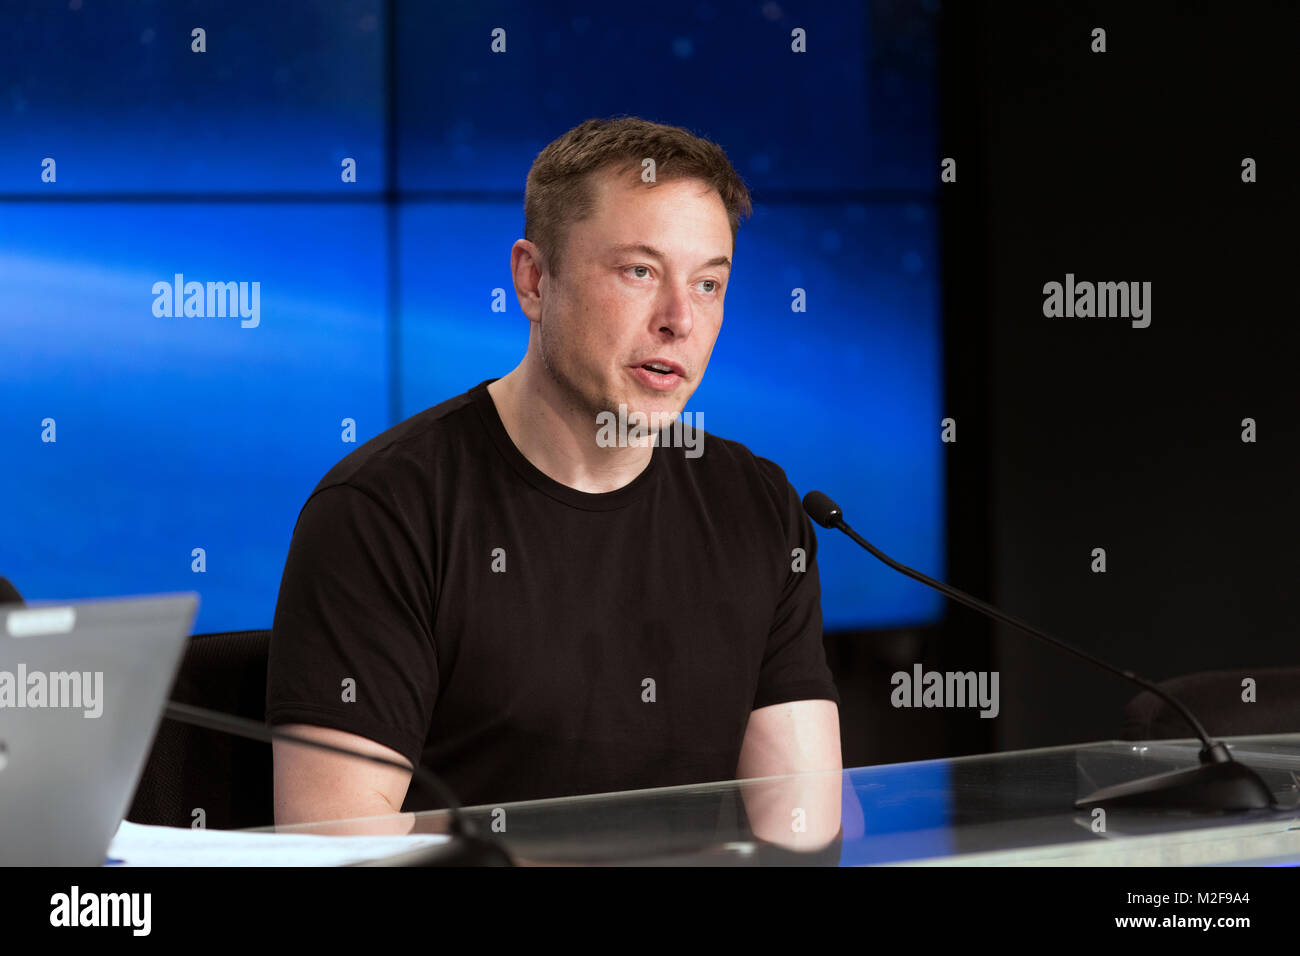 Cape Canaveral, Florida. February 6, 2018 .  SpaceX CEO and Founder Elon Musk speaks during a press conference after the Falcon 9 SpaceX heavy rocket launched successfully from the Kennedy Space Center February 6, 2018 in Cape Canaveral, Florida. Credit: Planetpix/Alamy Live News Stock Photo